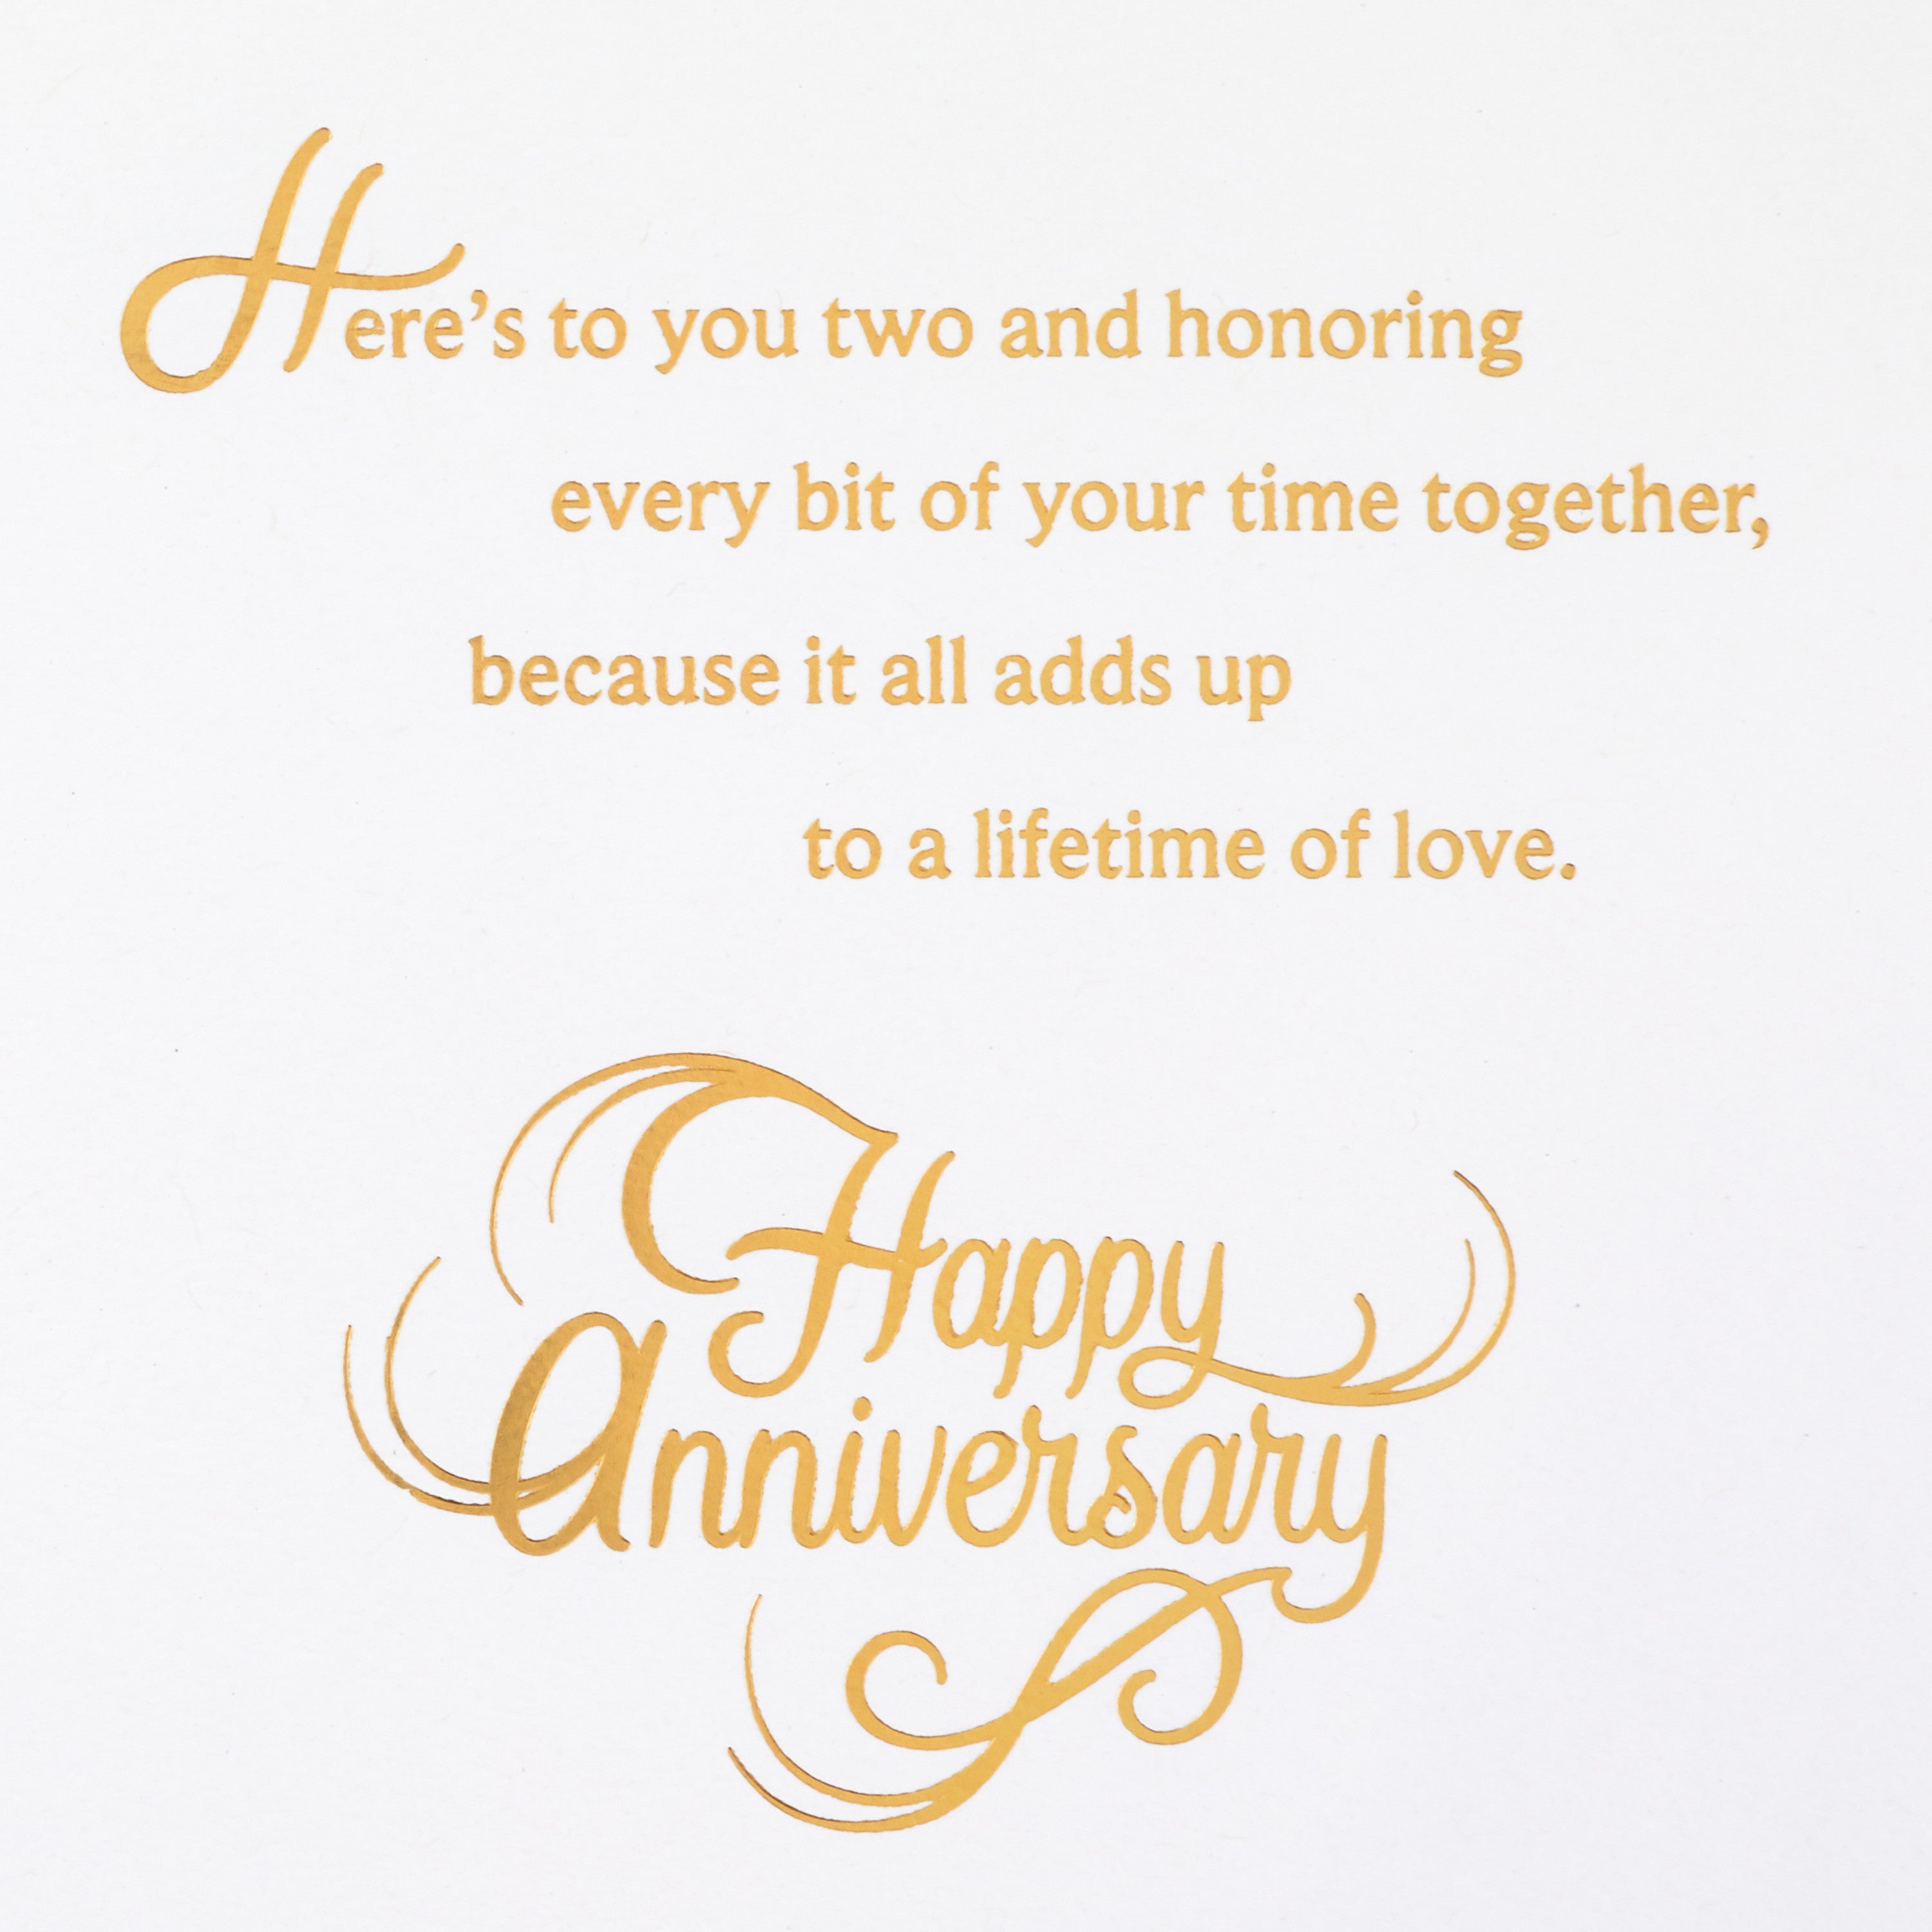 Hallmark 25th Anniversary Card for Couple (Here's to You Two)